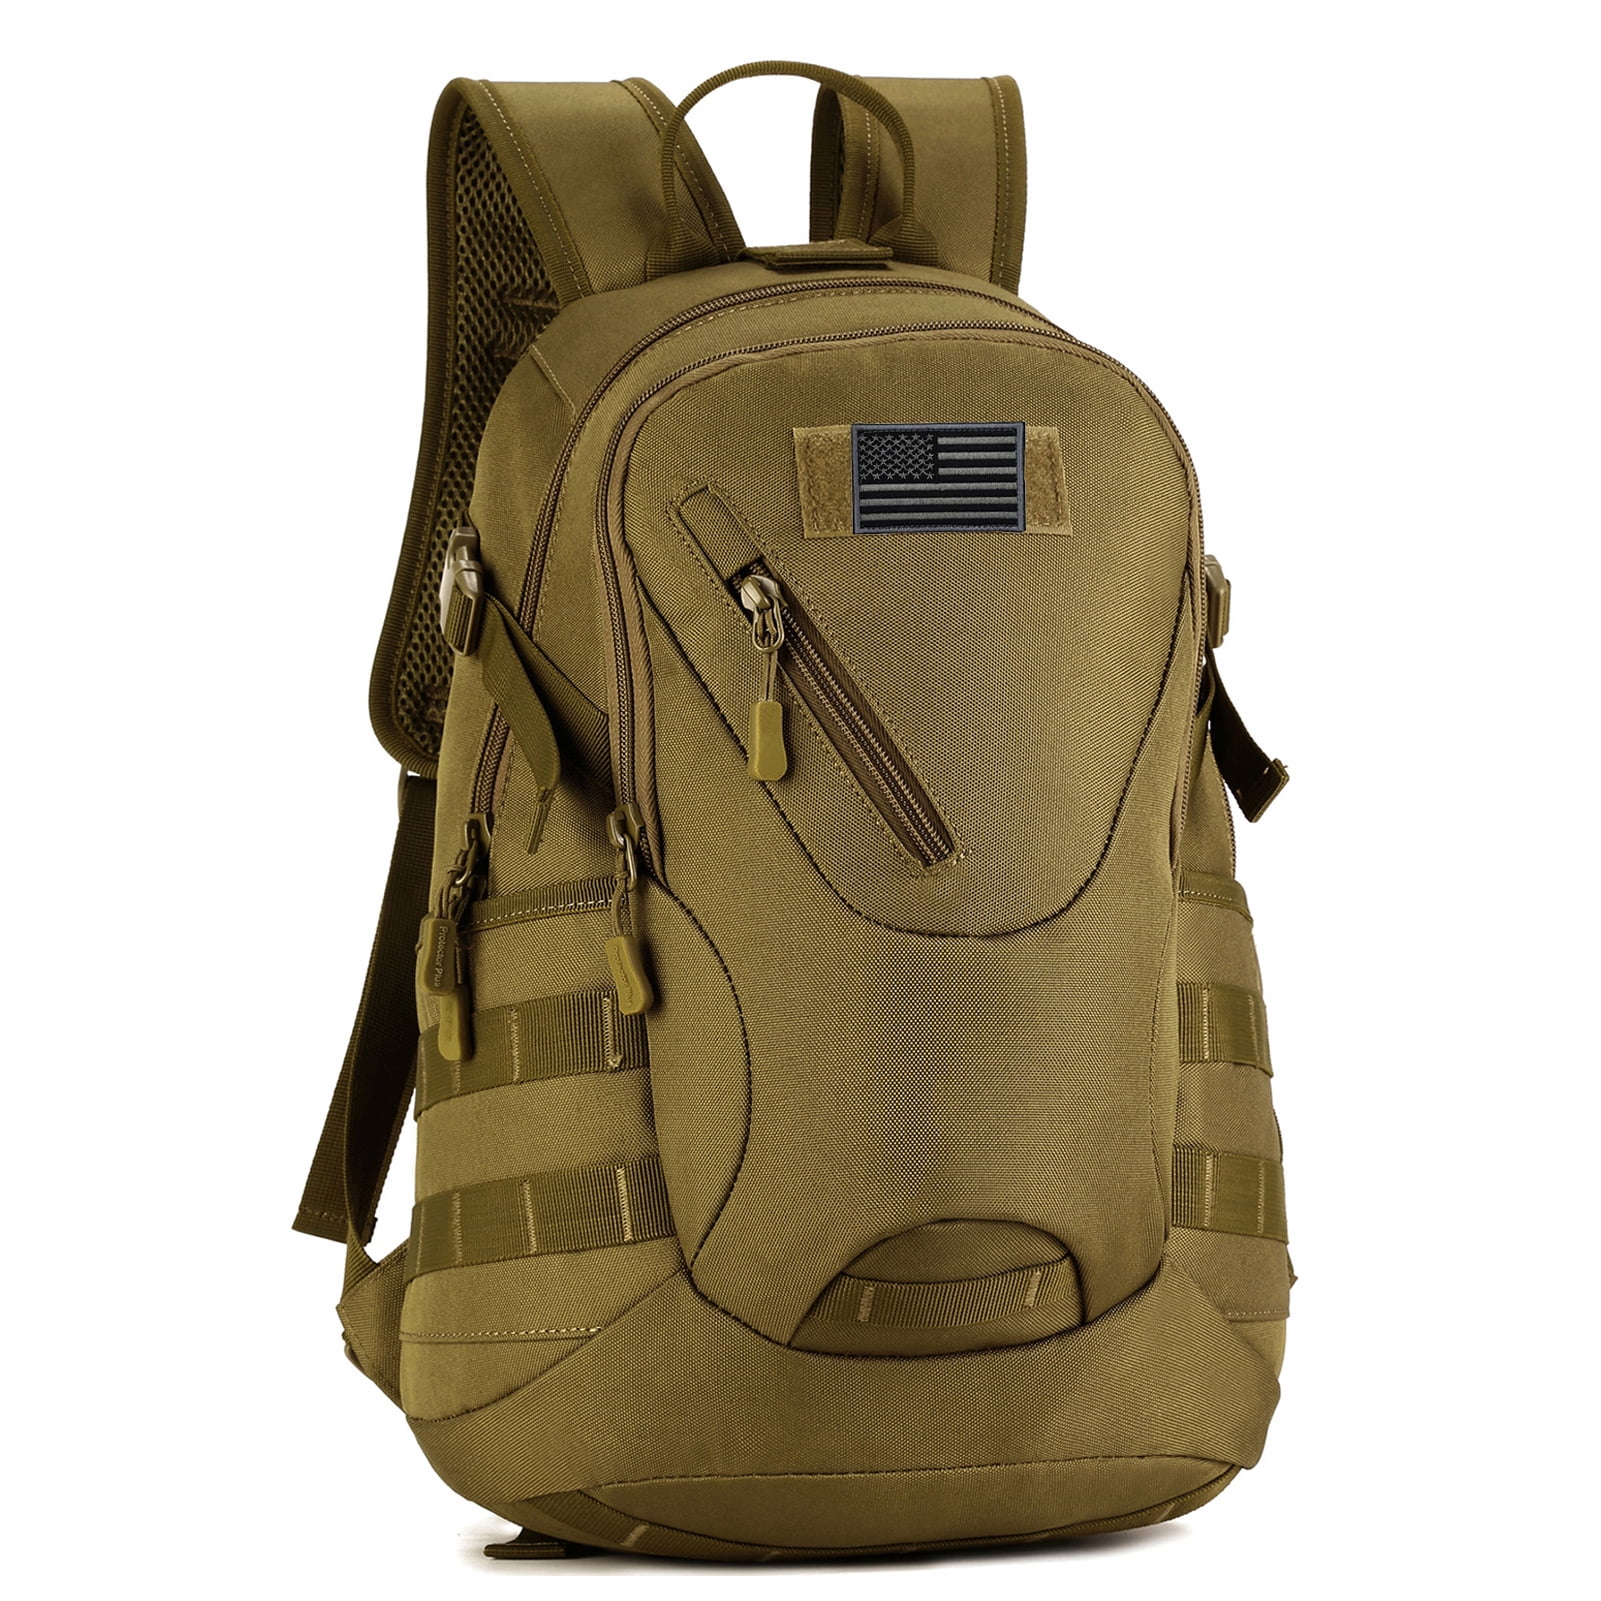 12L Tactical Backpack Molle School Bag Military Assault Rucksack Outdoor  Hiking